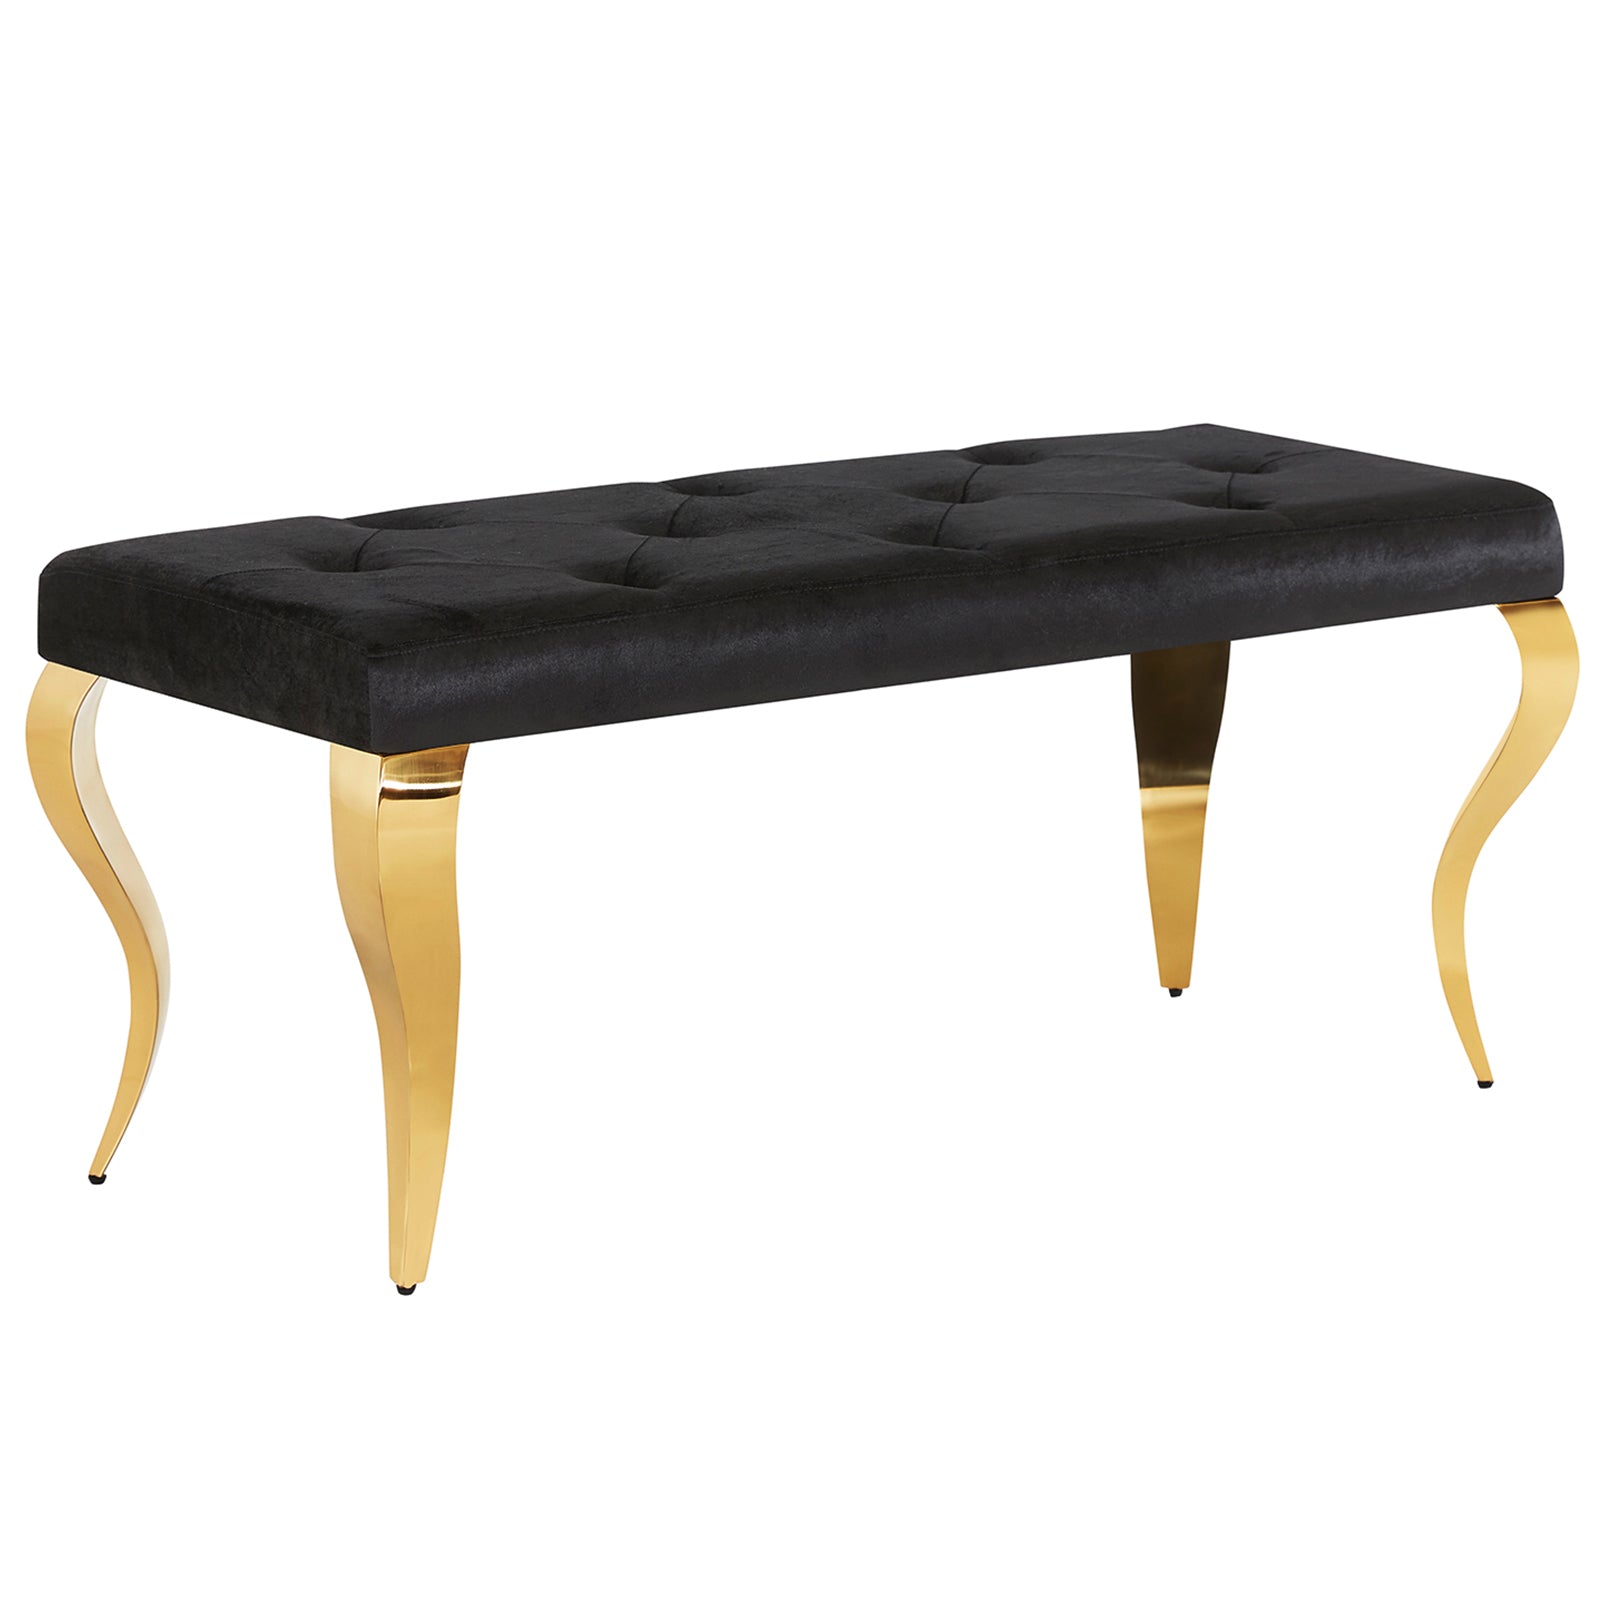 Add Sophistication to Your Decor with AUZ Black Velvet Benches and Polished Gold Legs